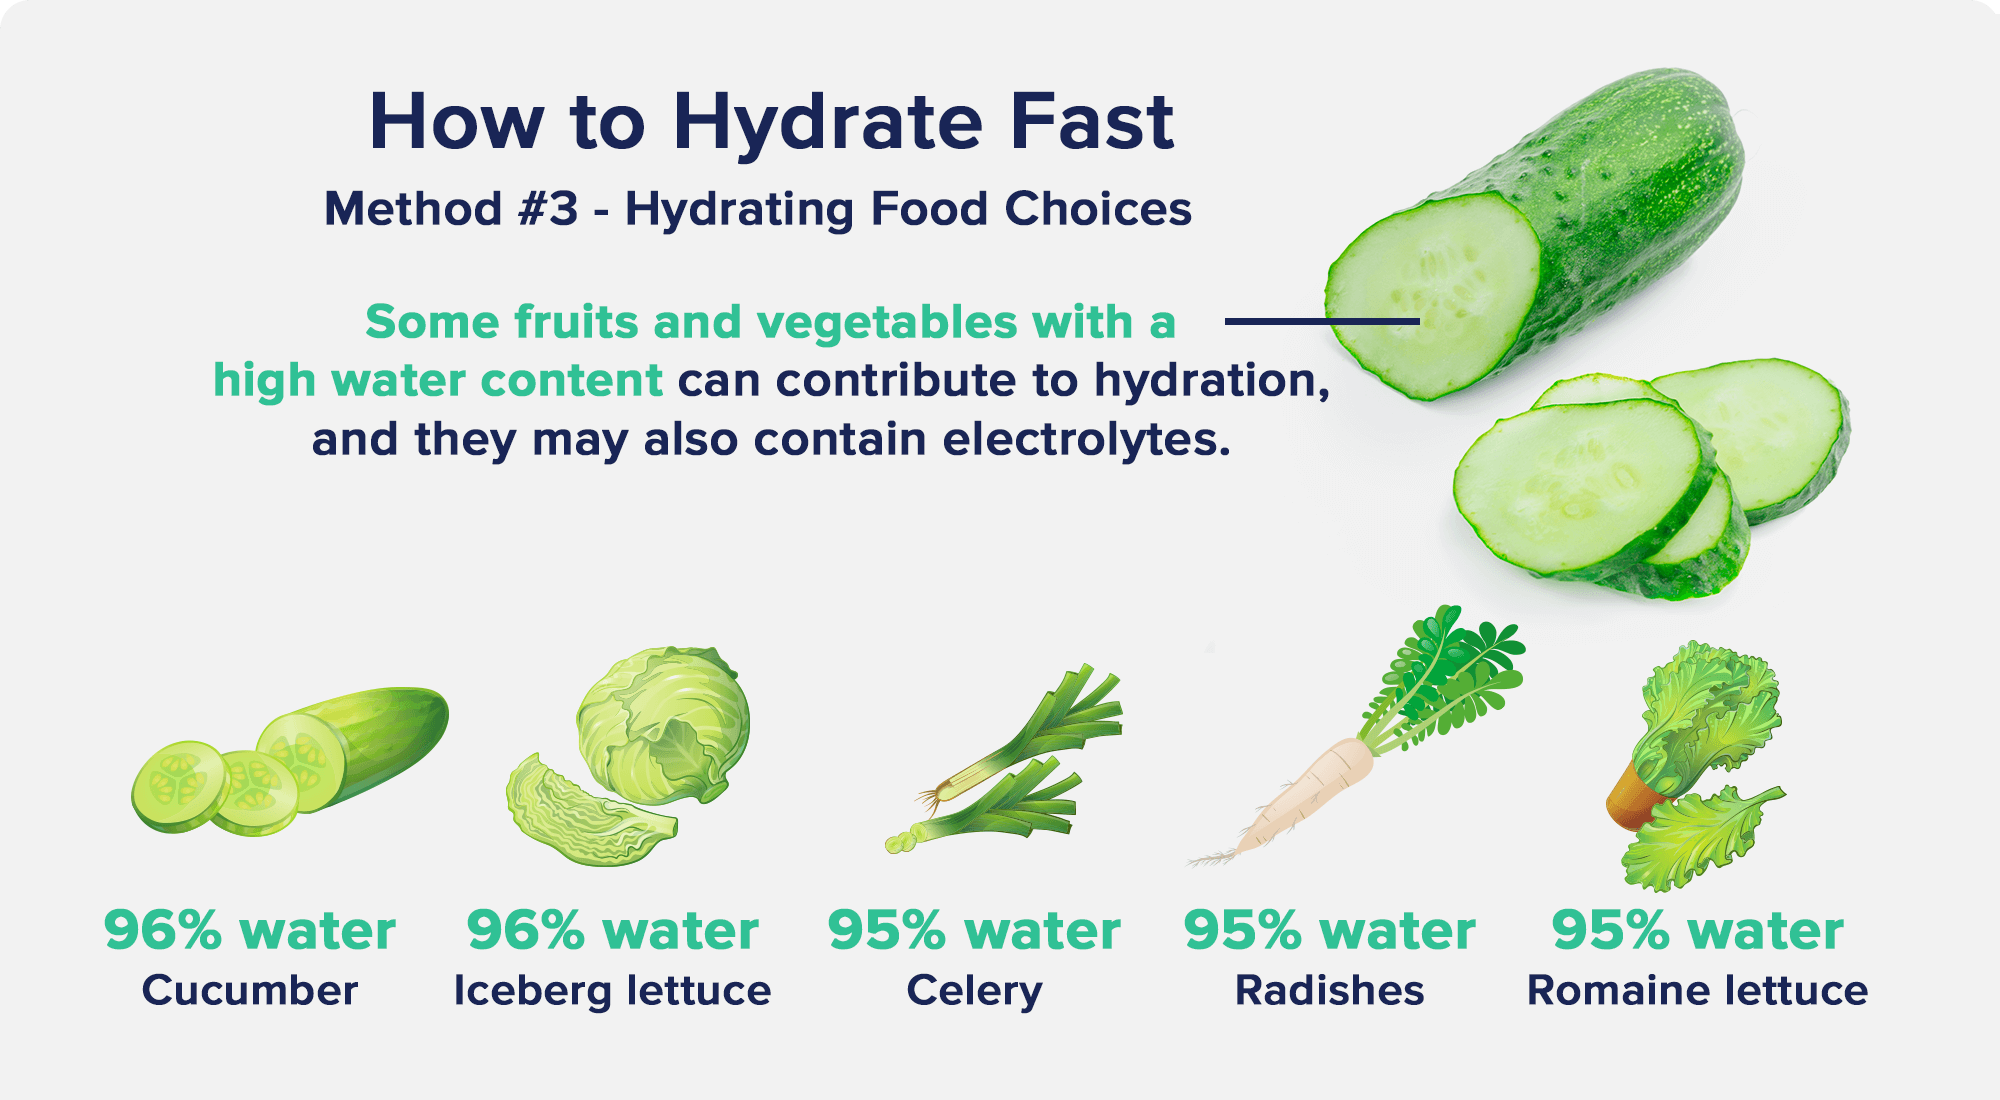 How to Hydrate Fast - Method #3 Hydrating Food Choices